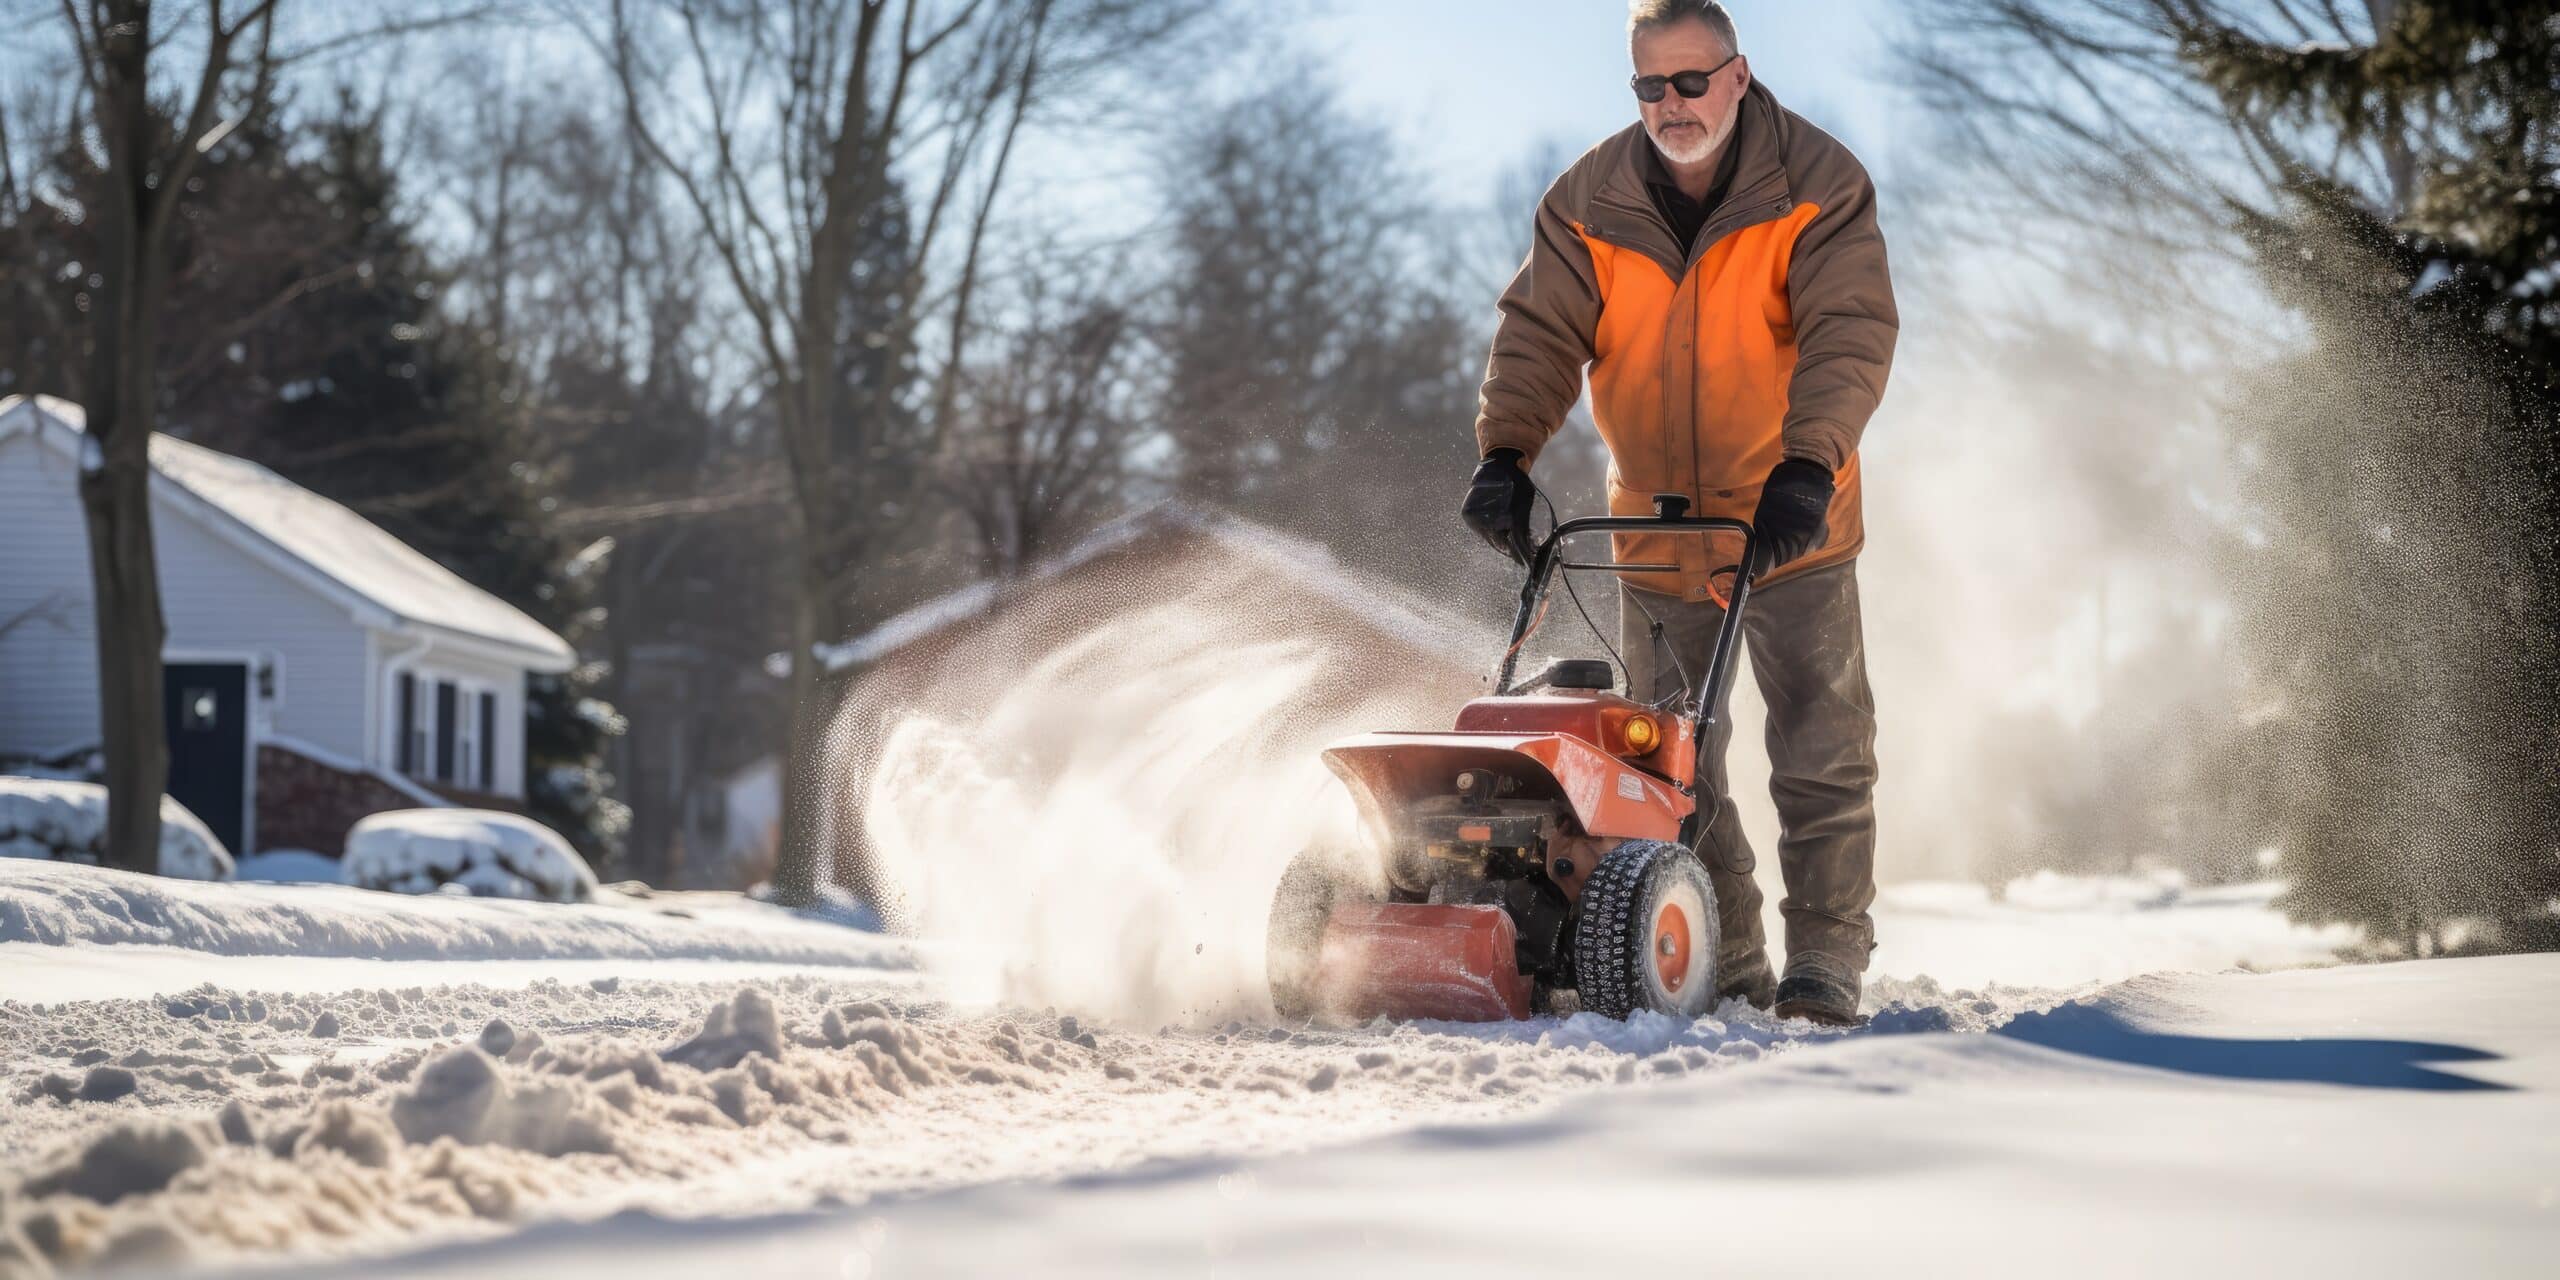 www.appr.com : Are battery snow blowers comparable to gas models?